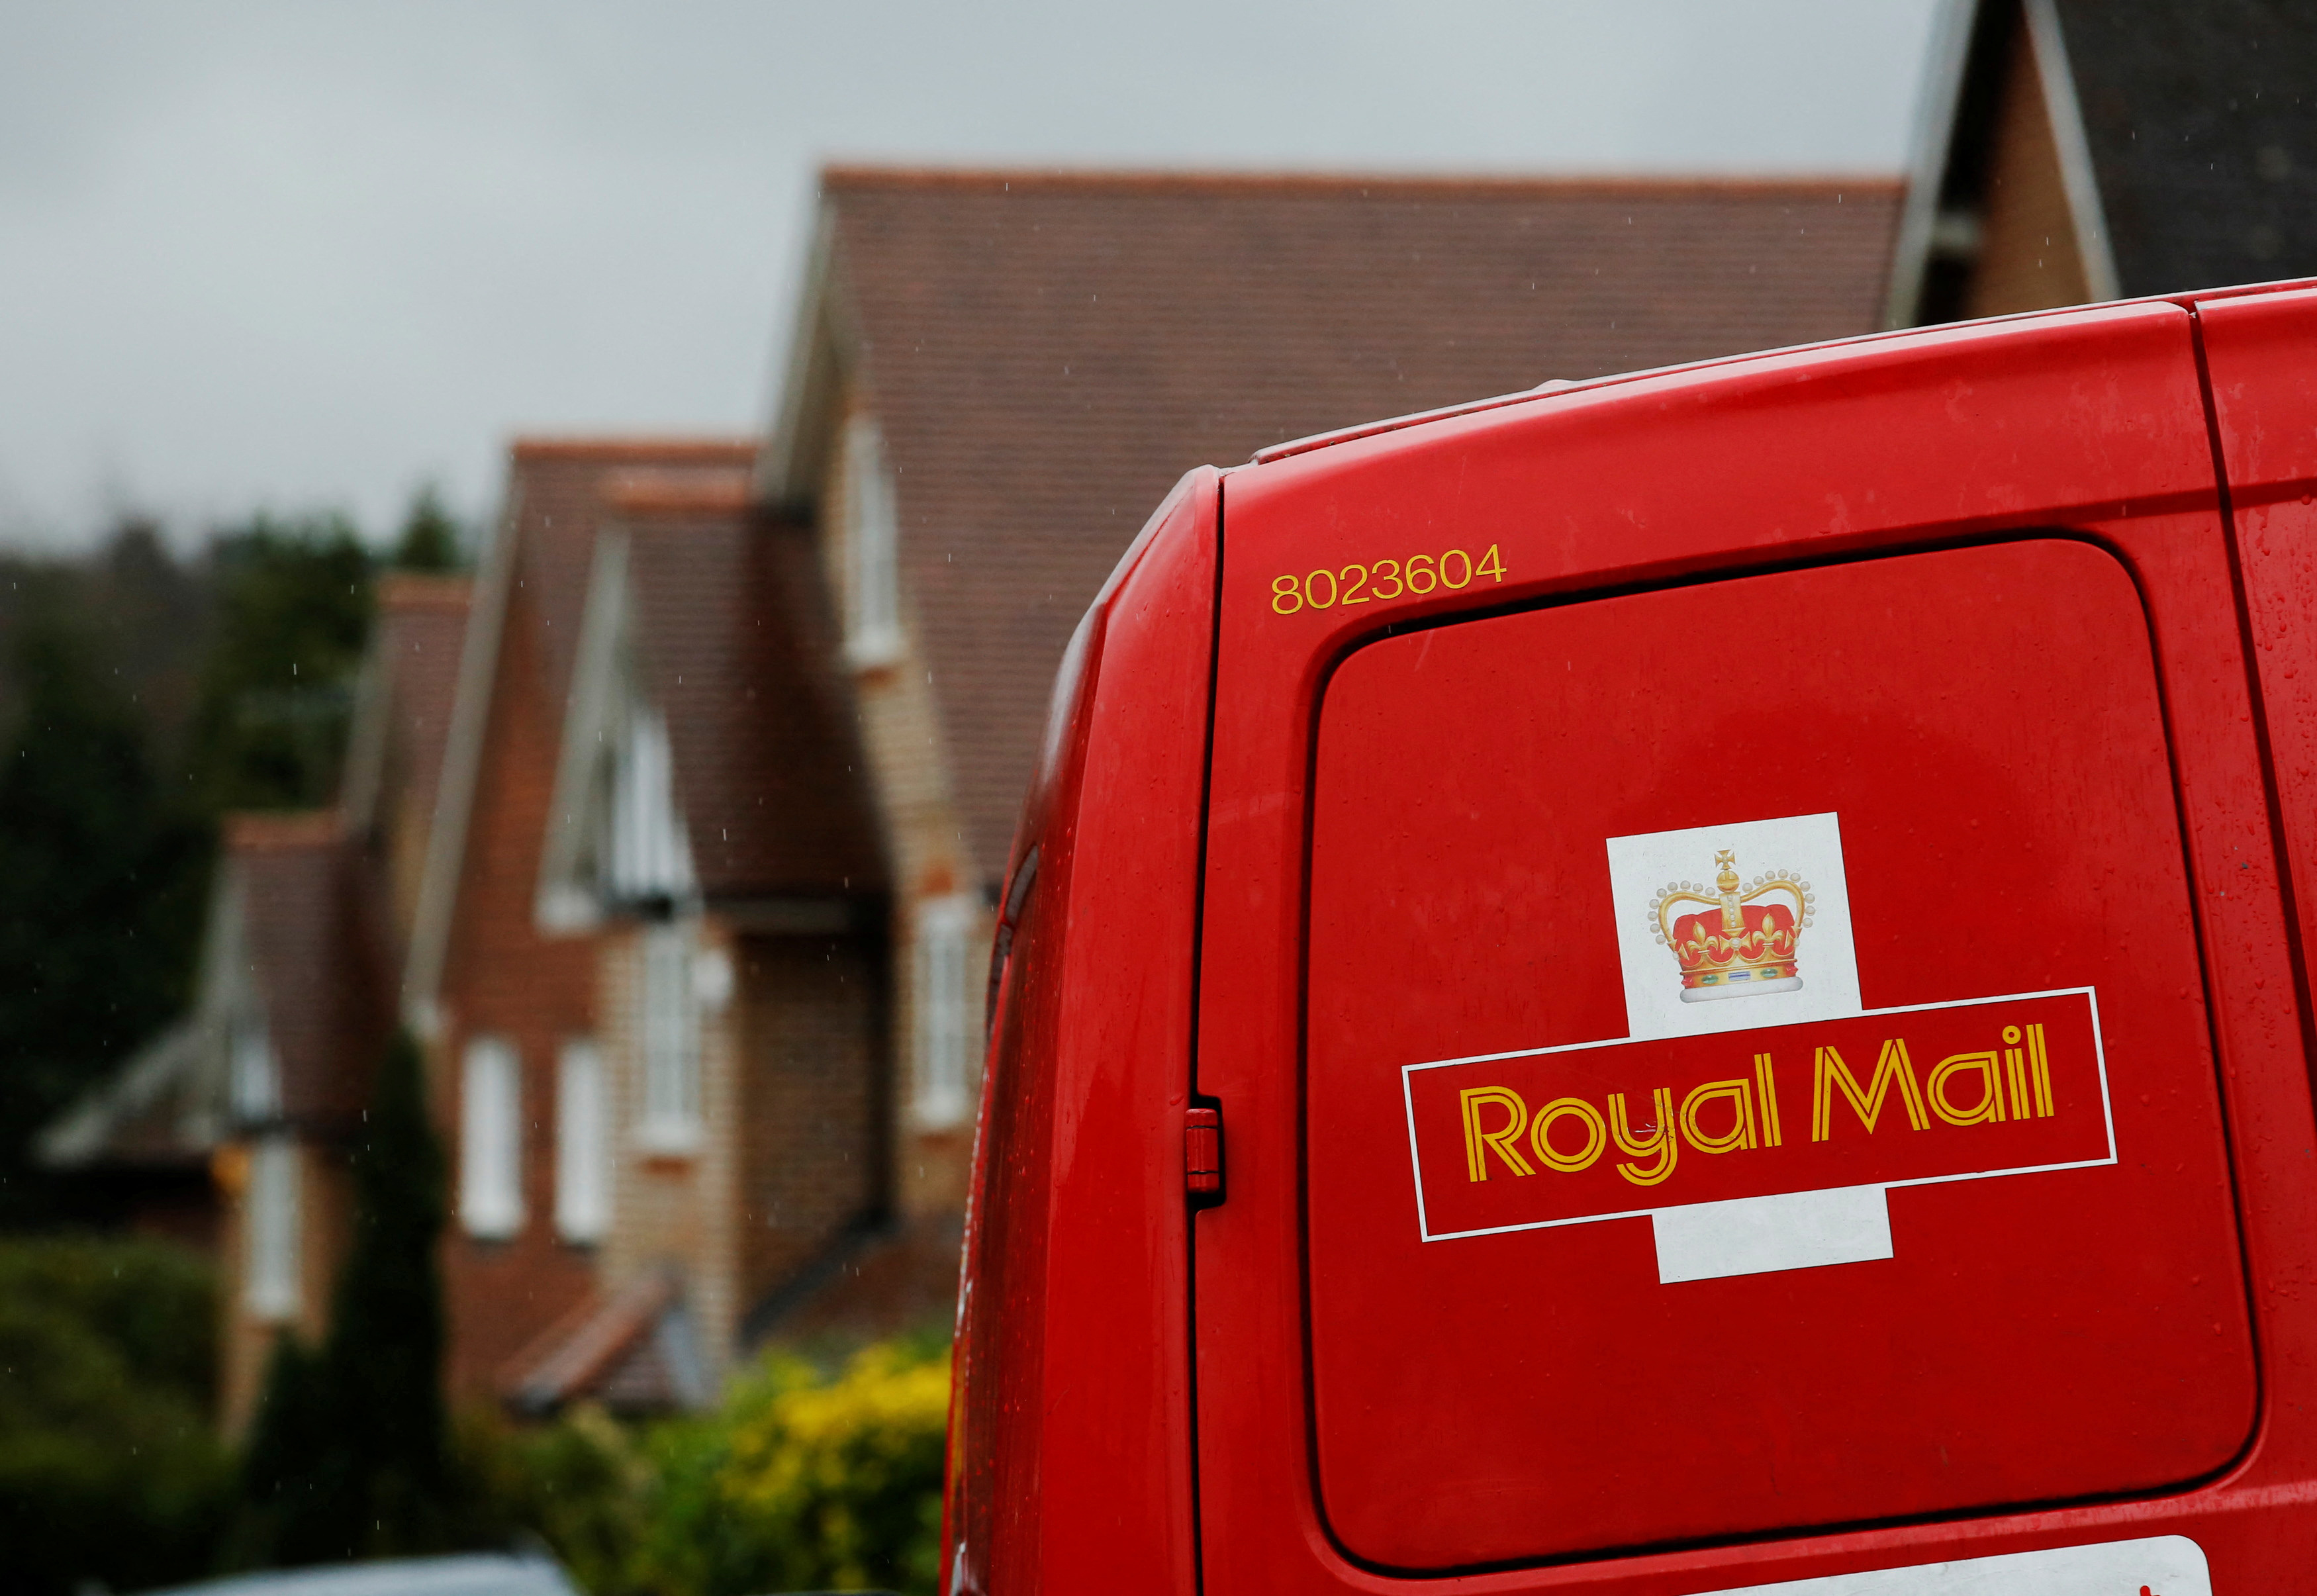 A Royal Mail postal van is parked outside homes in Maybury near Woking in southern England